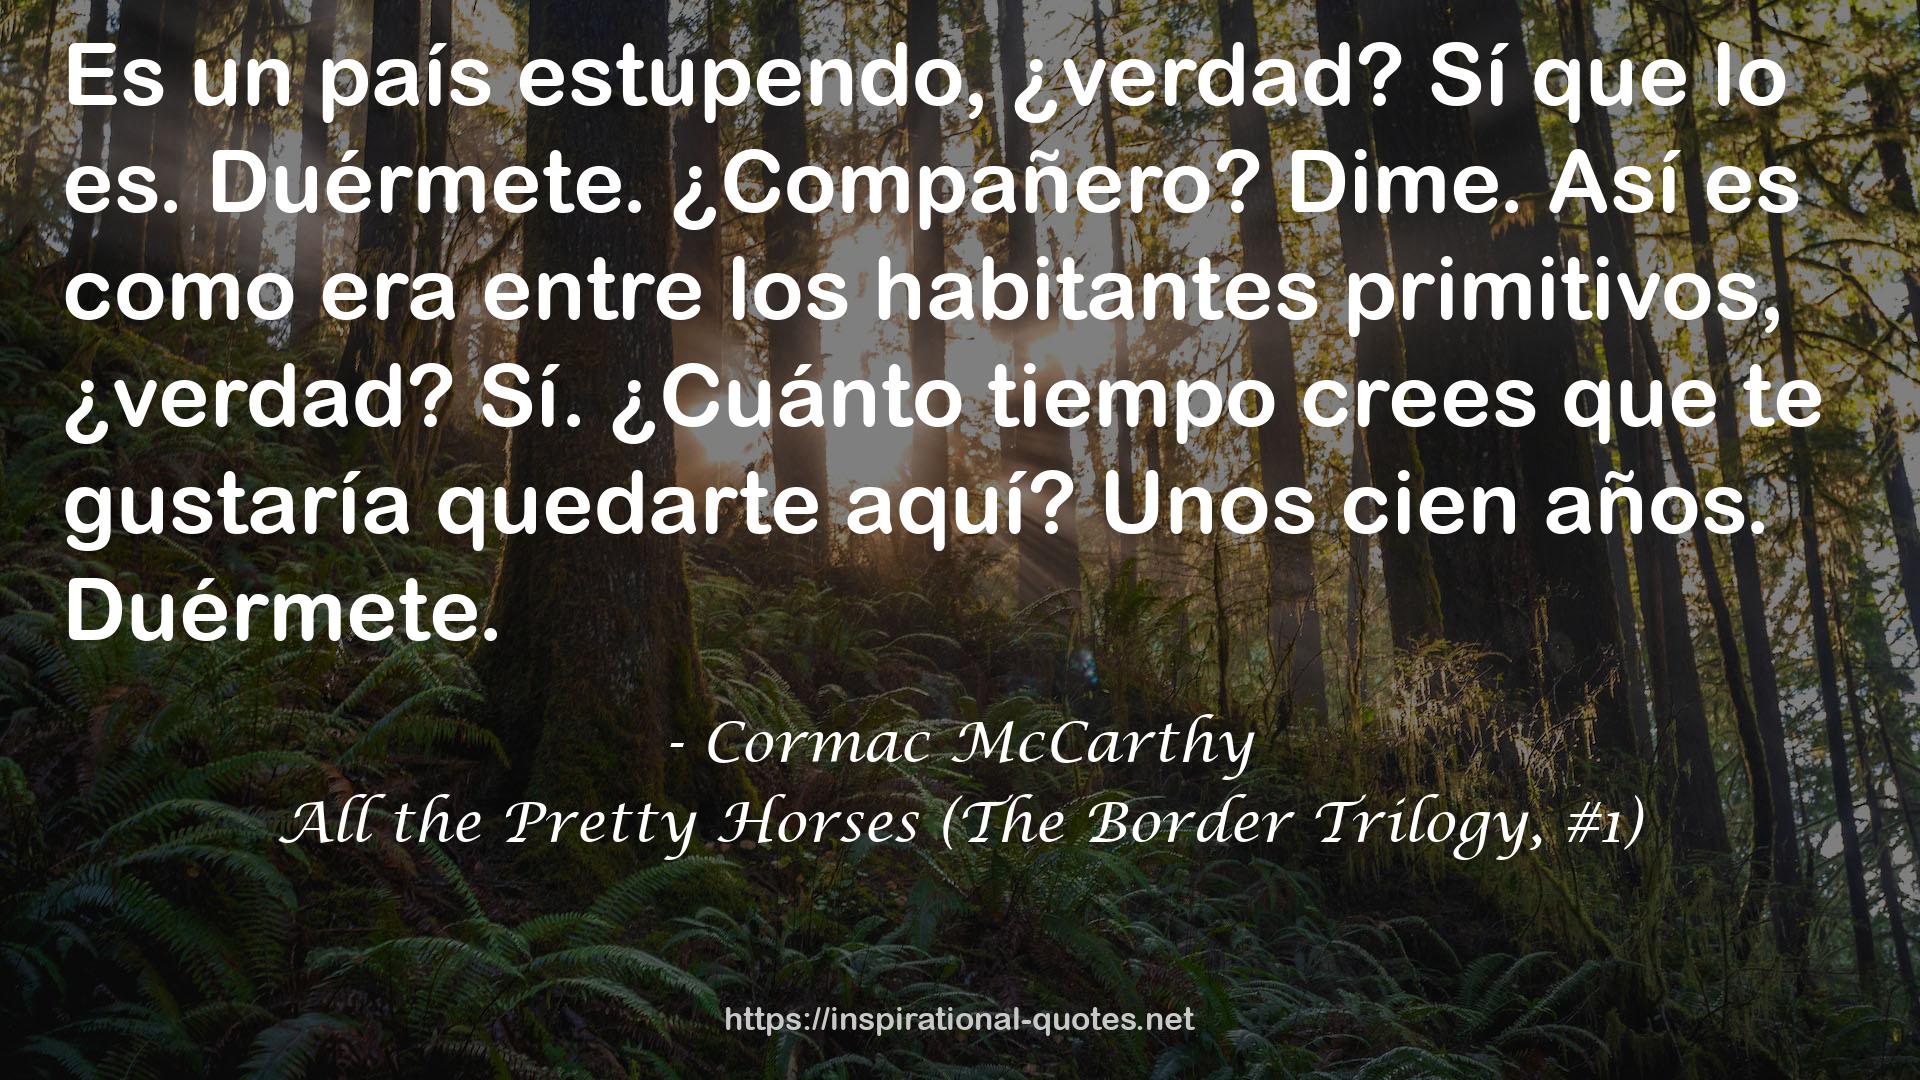 All the Pretty Horses (The Border Trilogy, #1) QUOTES